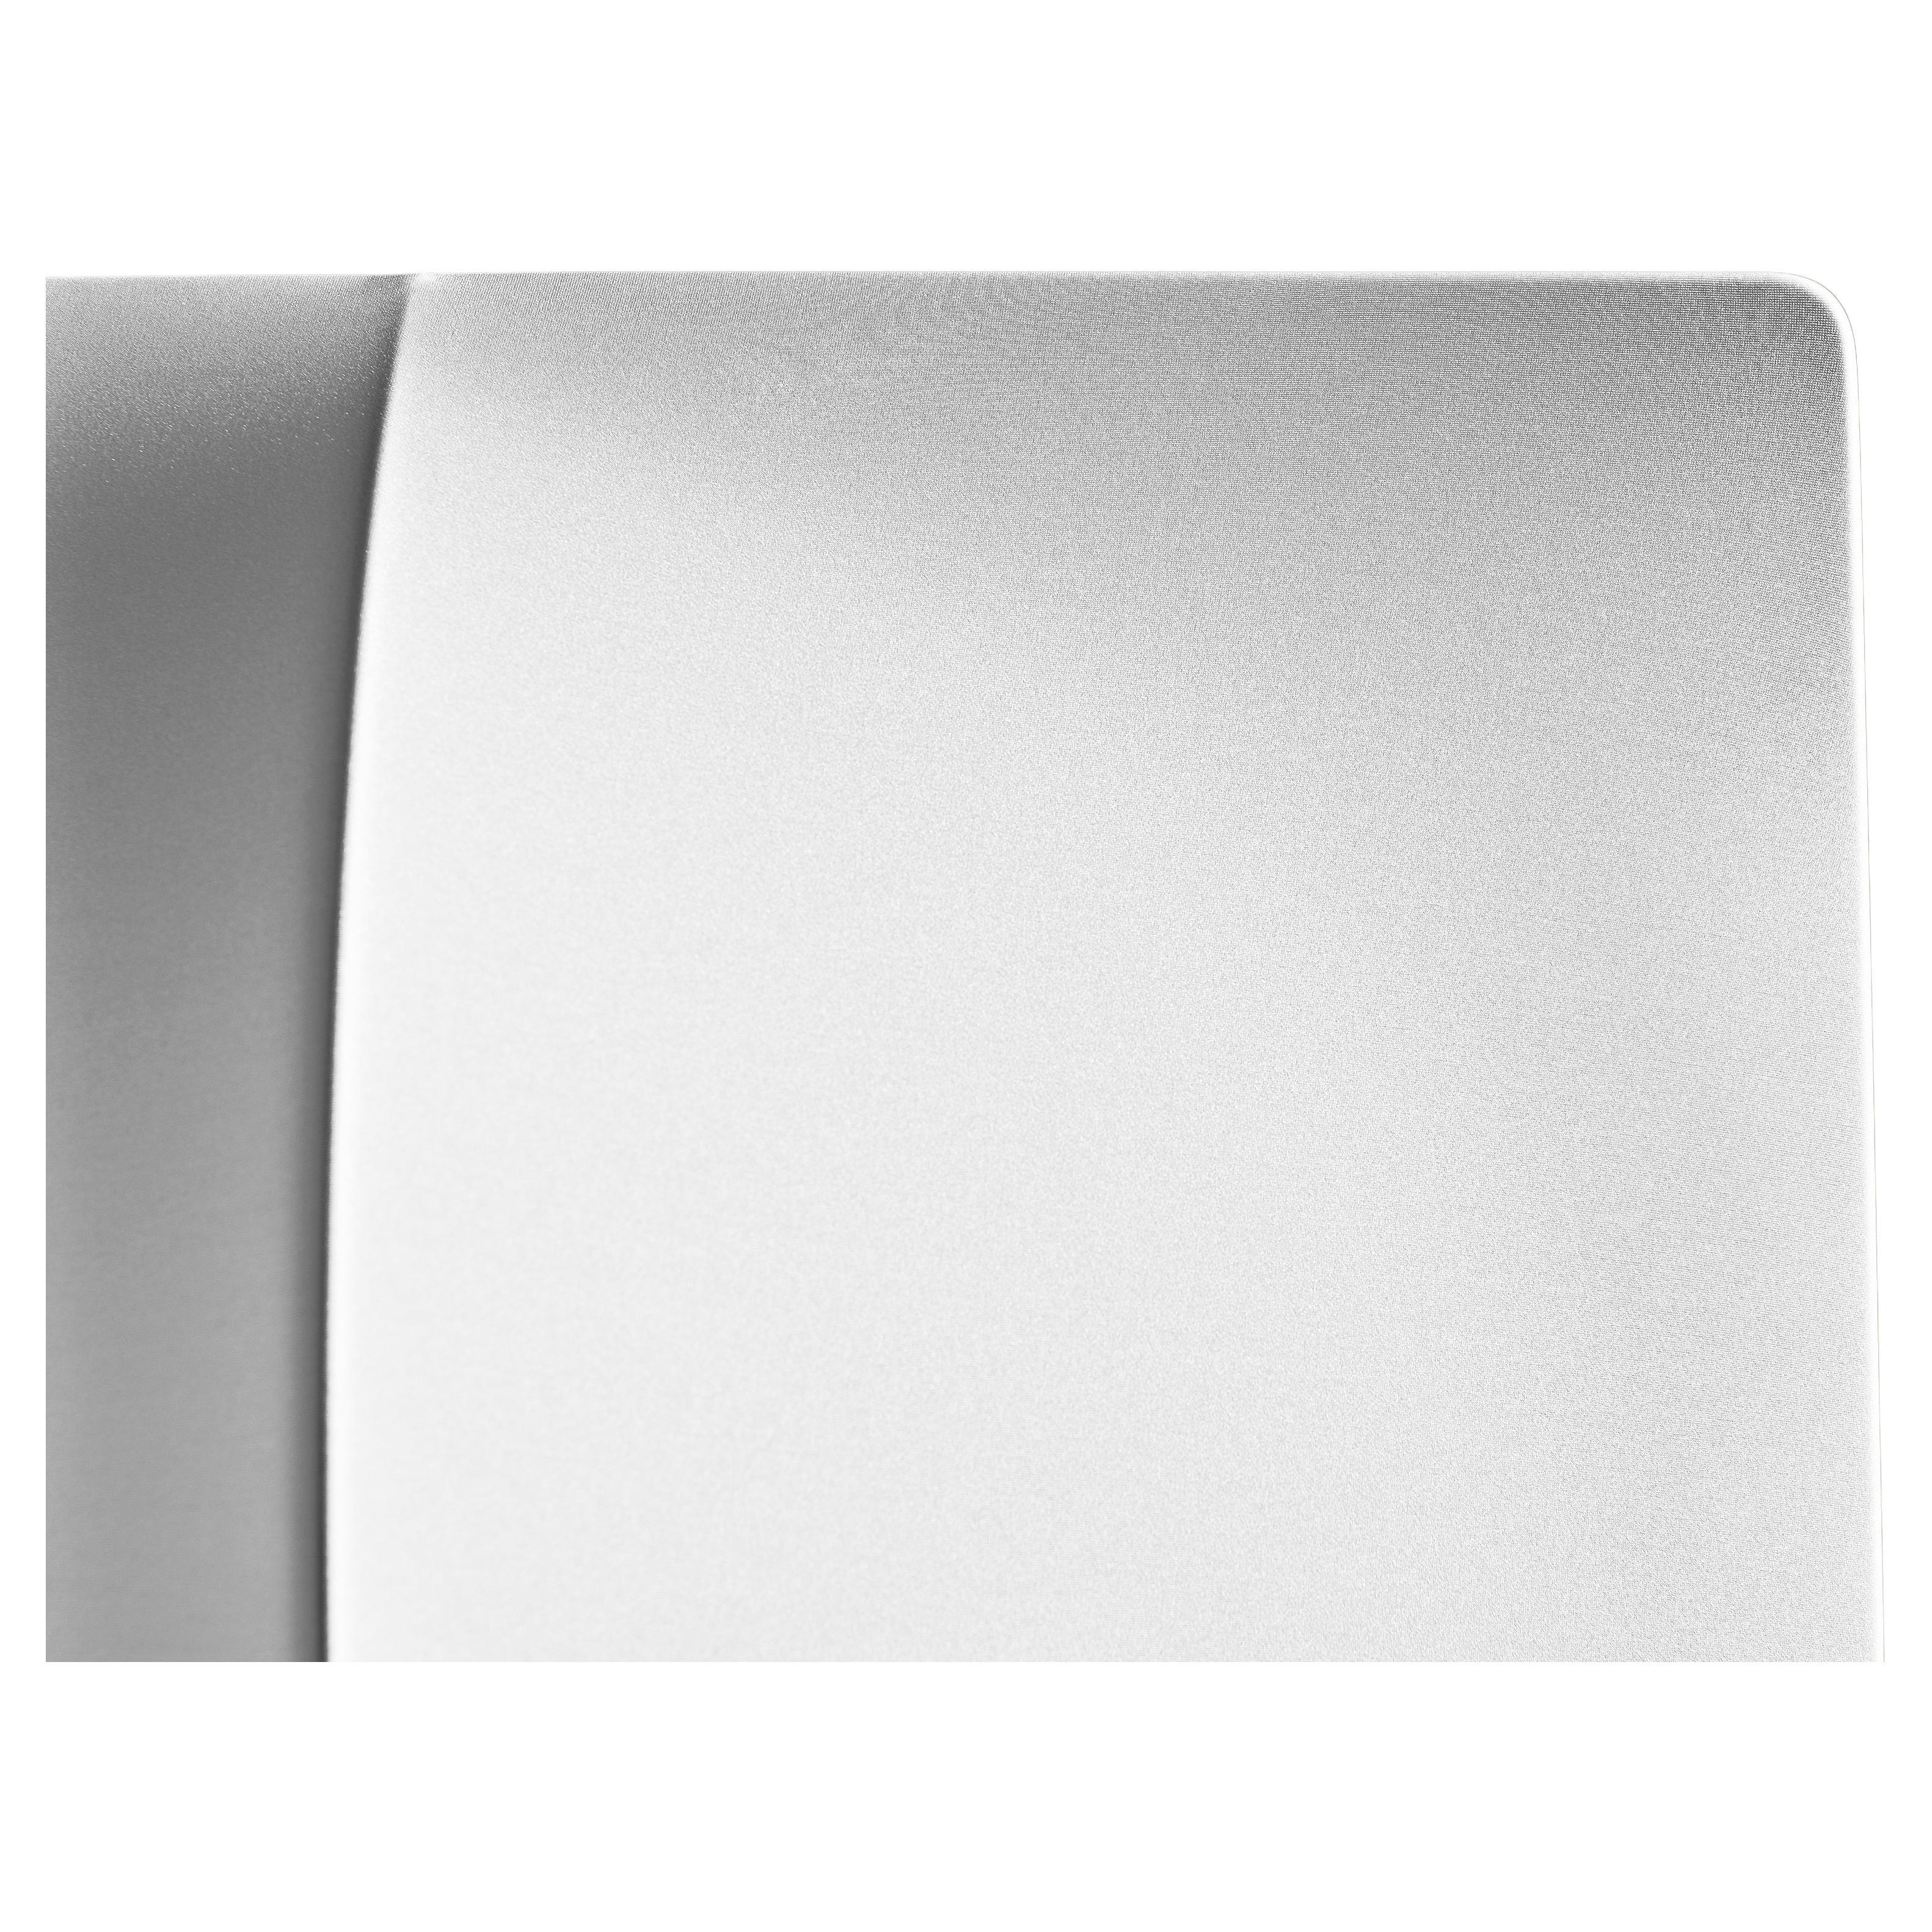 Axolight Medium 60 Nelly Wall Lamp in White by Manuel & Vanessa Vivian For Sale